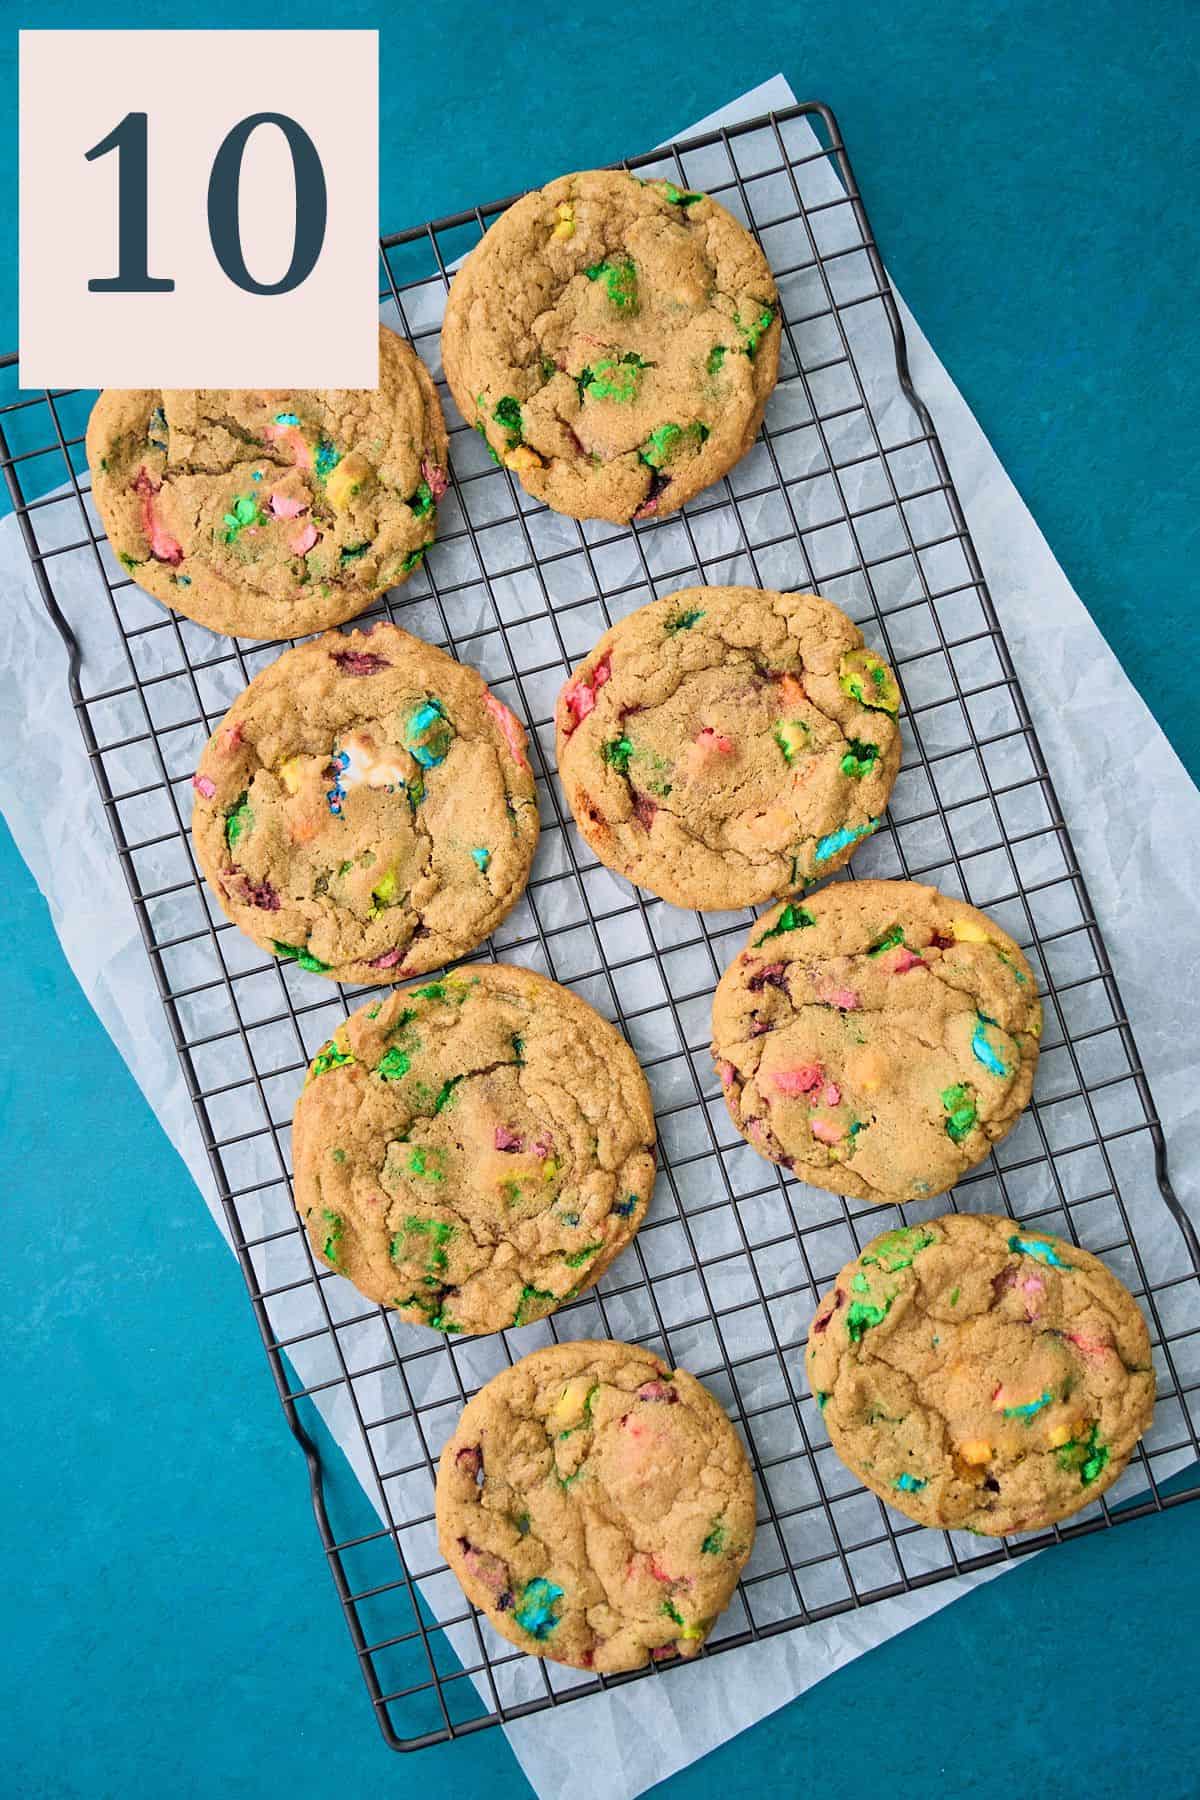 Lucky charms cookies cooling on a cooling rack.